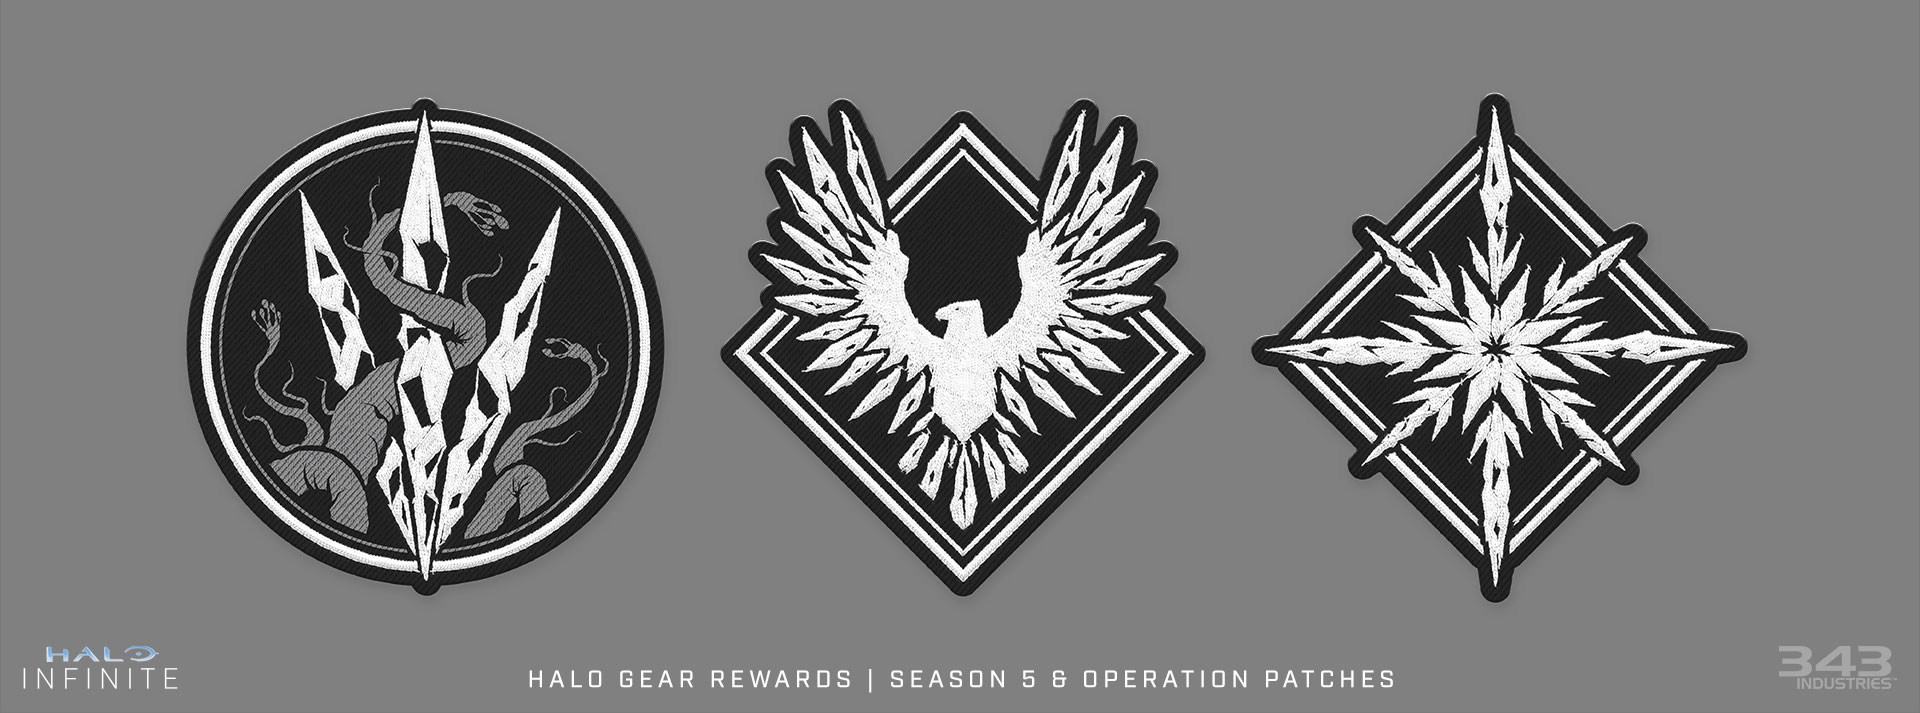 Images of the patches coming as part of the Season 5 offering from Halo Gear Rewards.